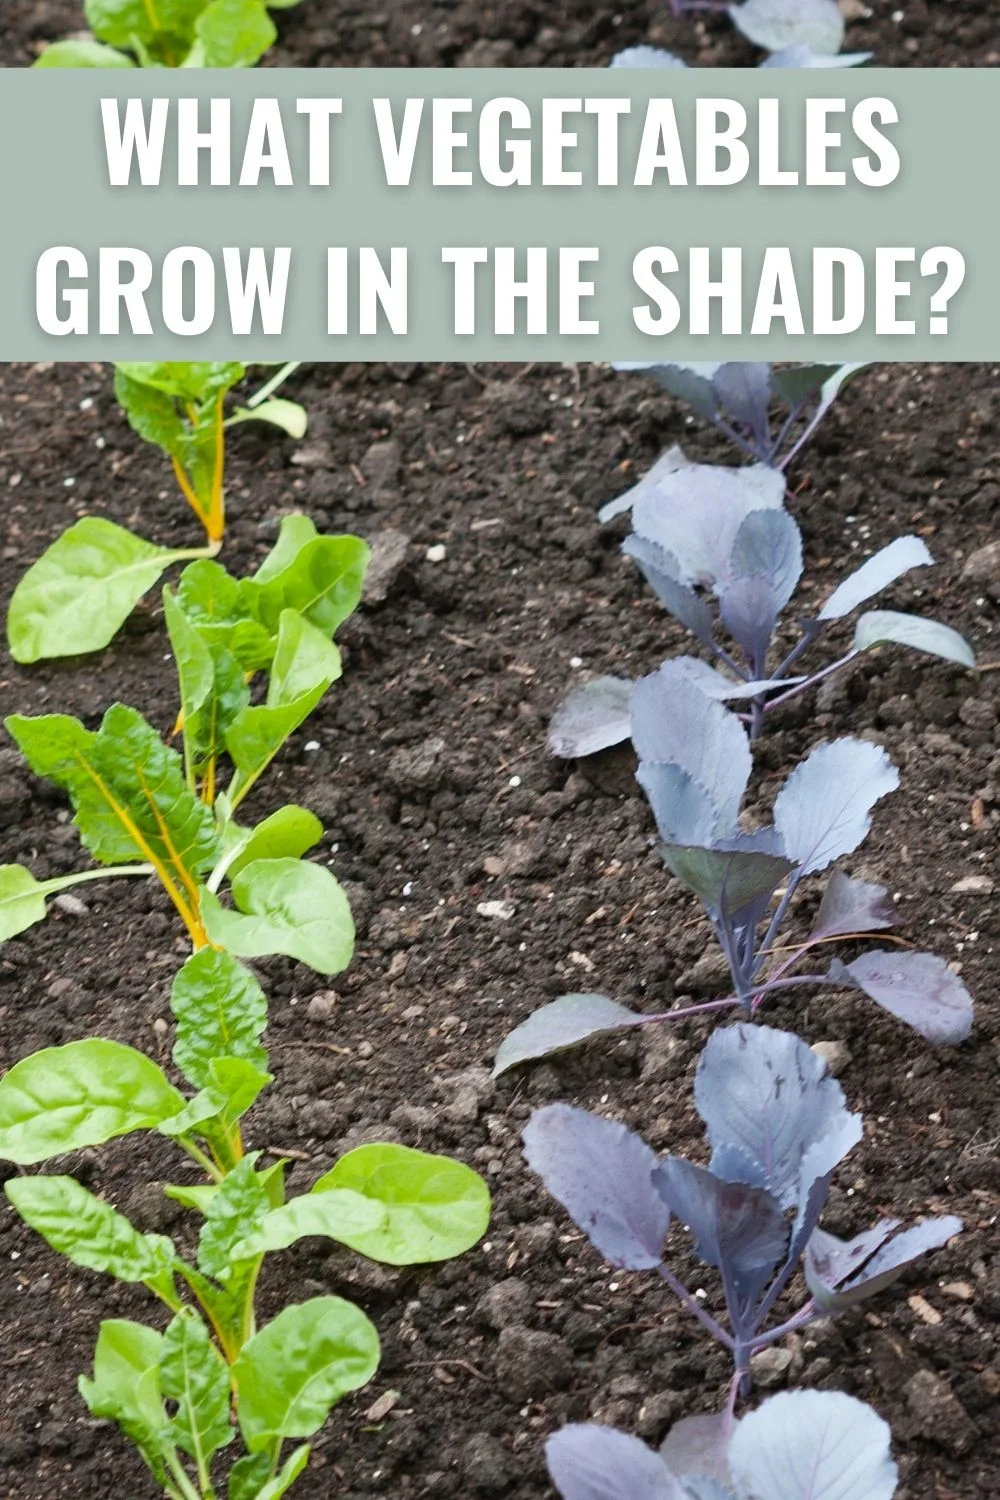 What Vegetables Grow In The Shade?